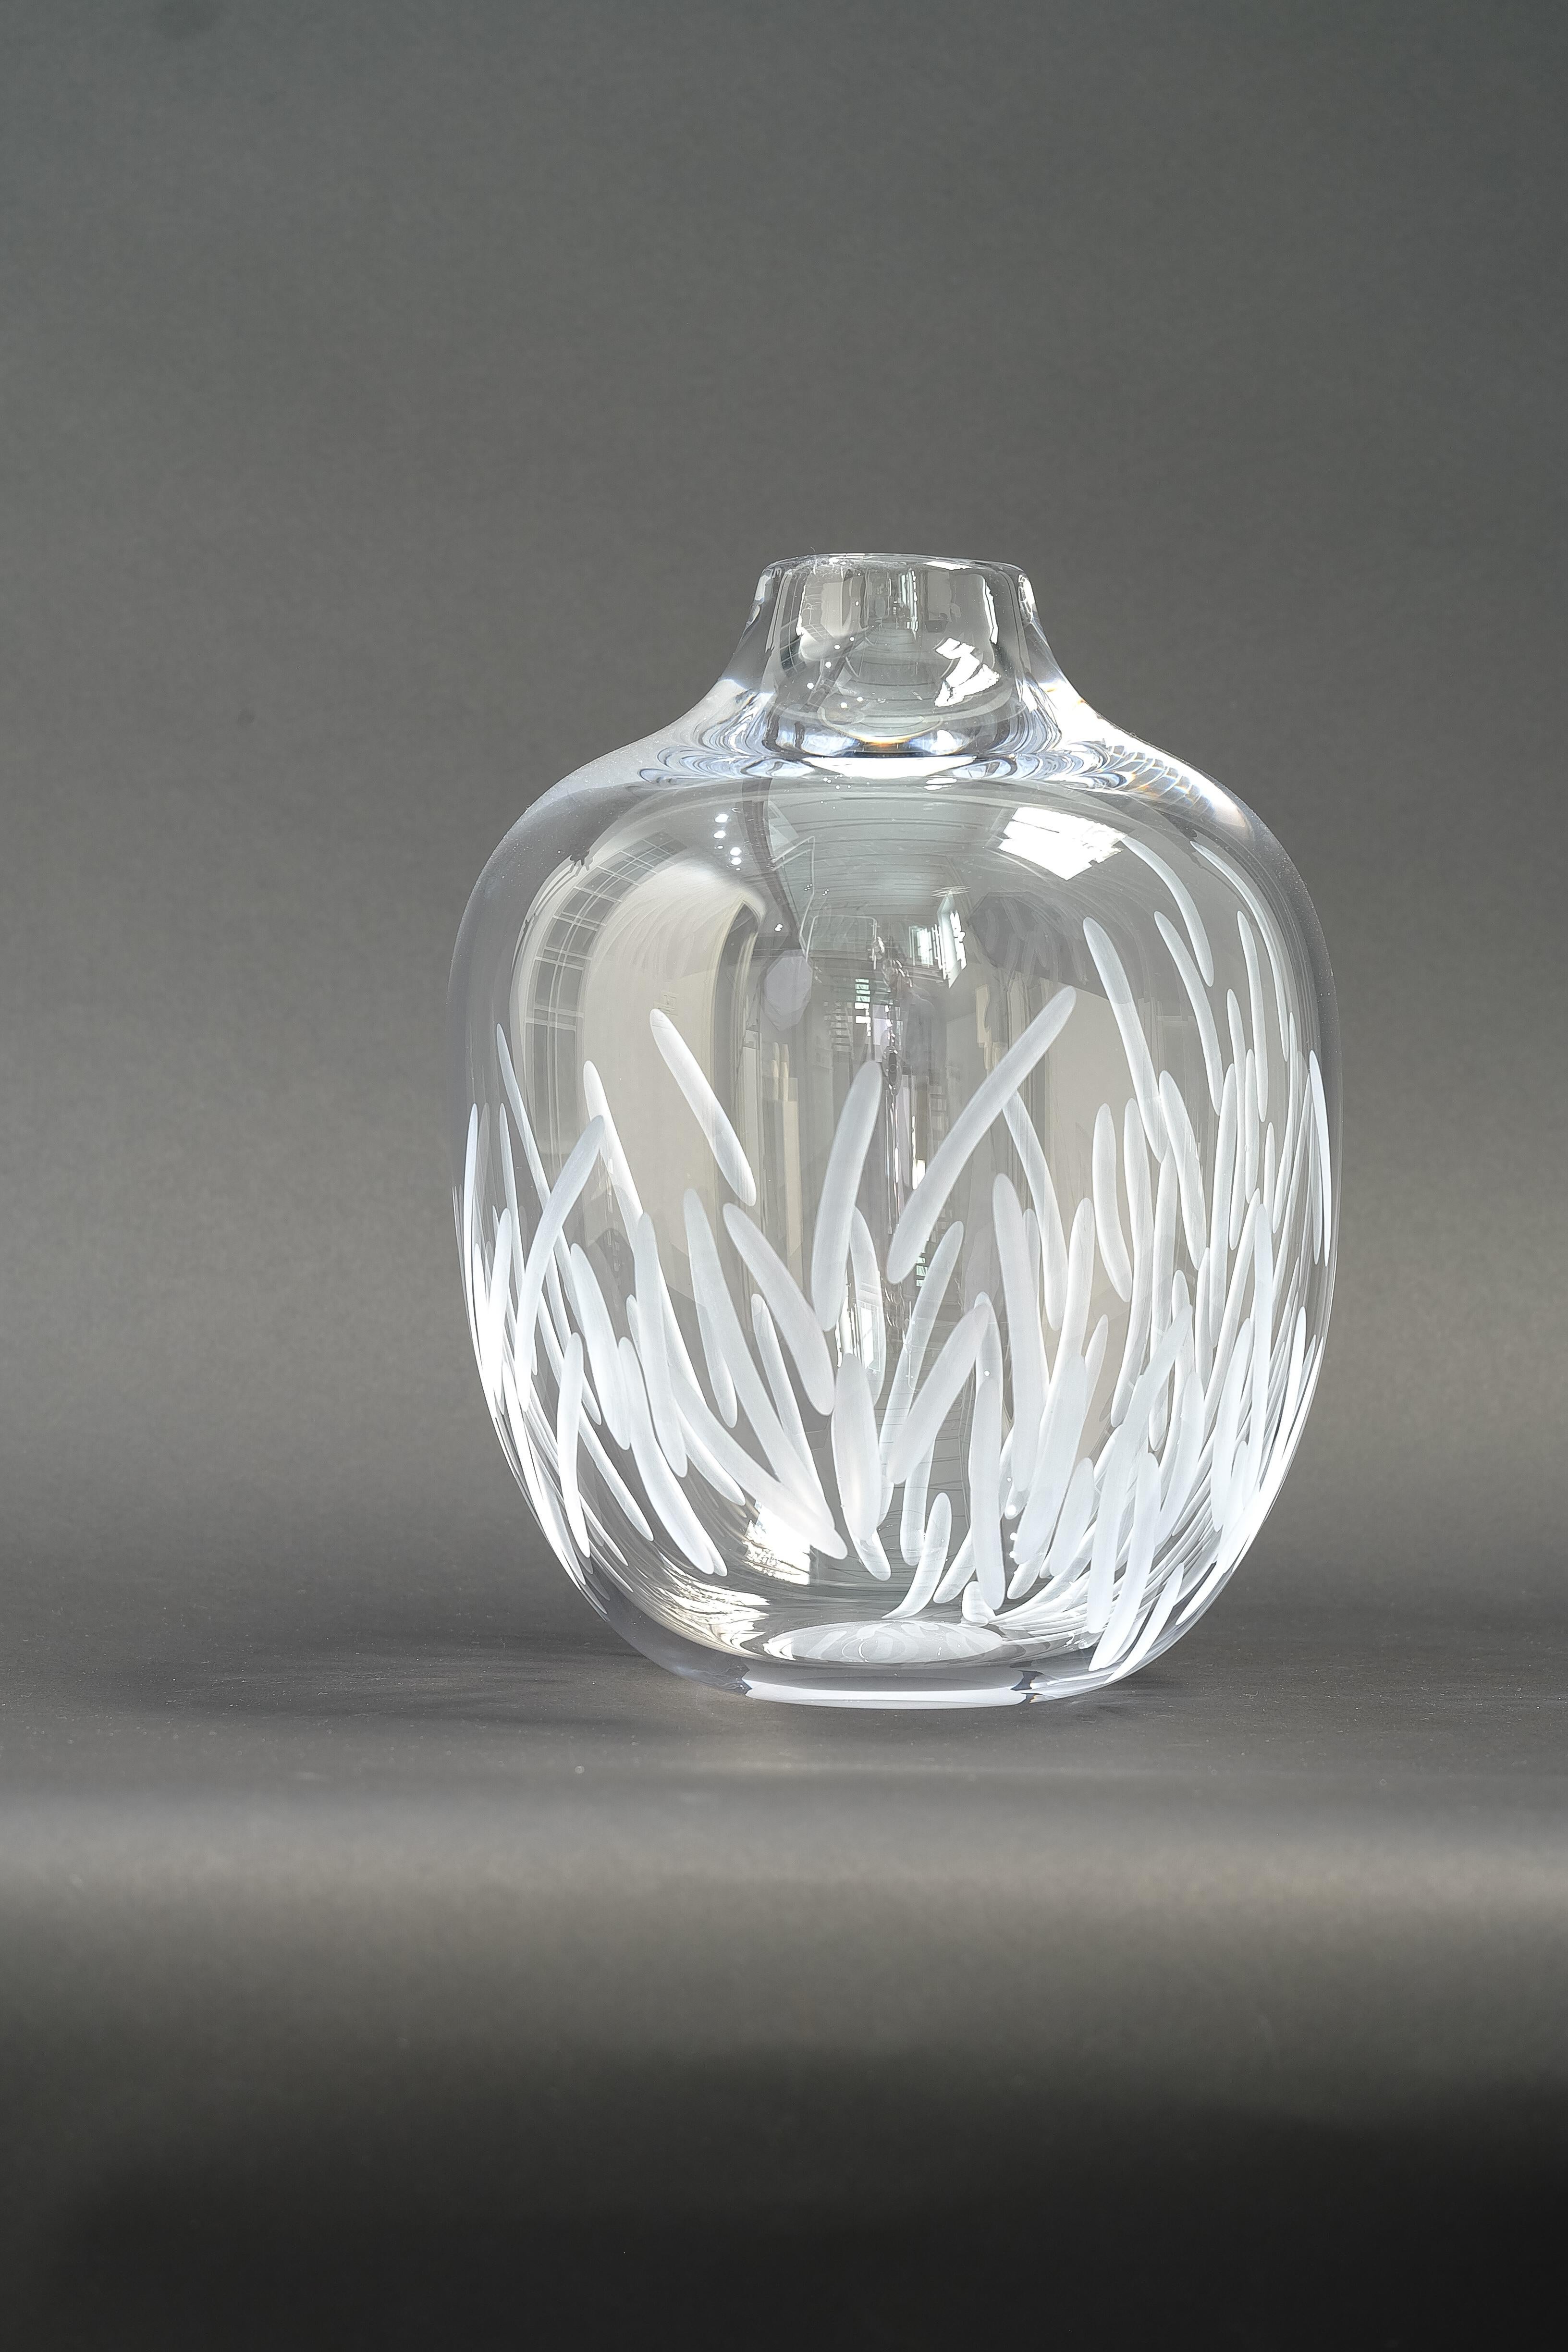 A clear glass vase blown and engraved by design duo Vezzini & Chen.

Vezzini & Chen’s work is defined by the artful marriage of hand carved ceramics and blown glass. The collections tread a fine line between functional and conceptual, with the